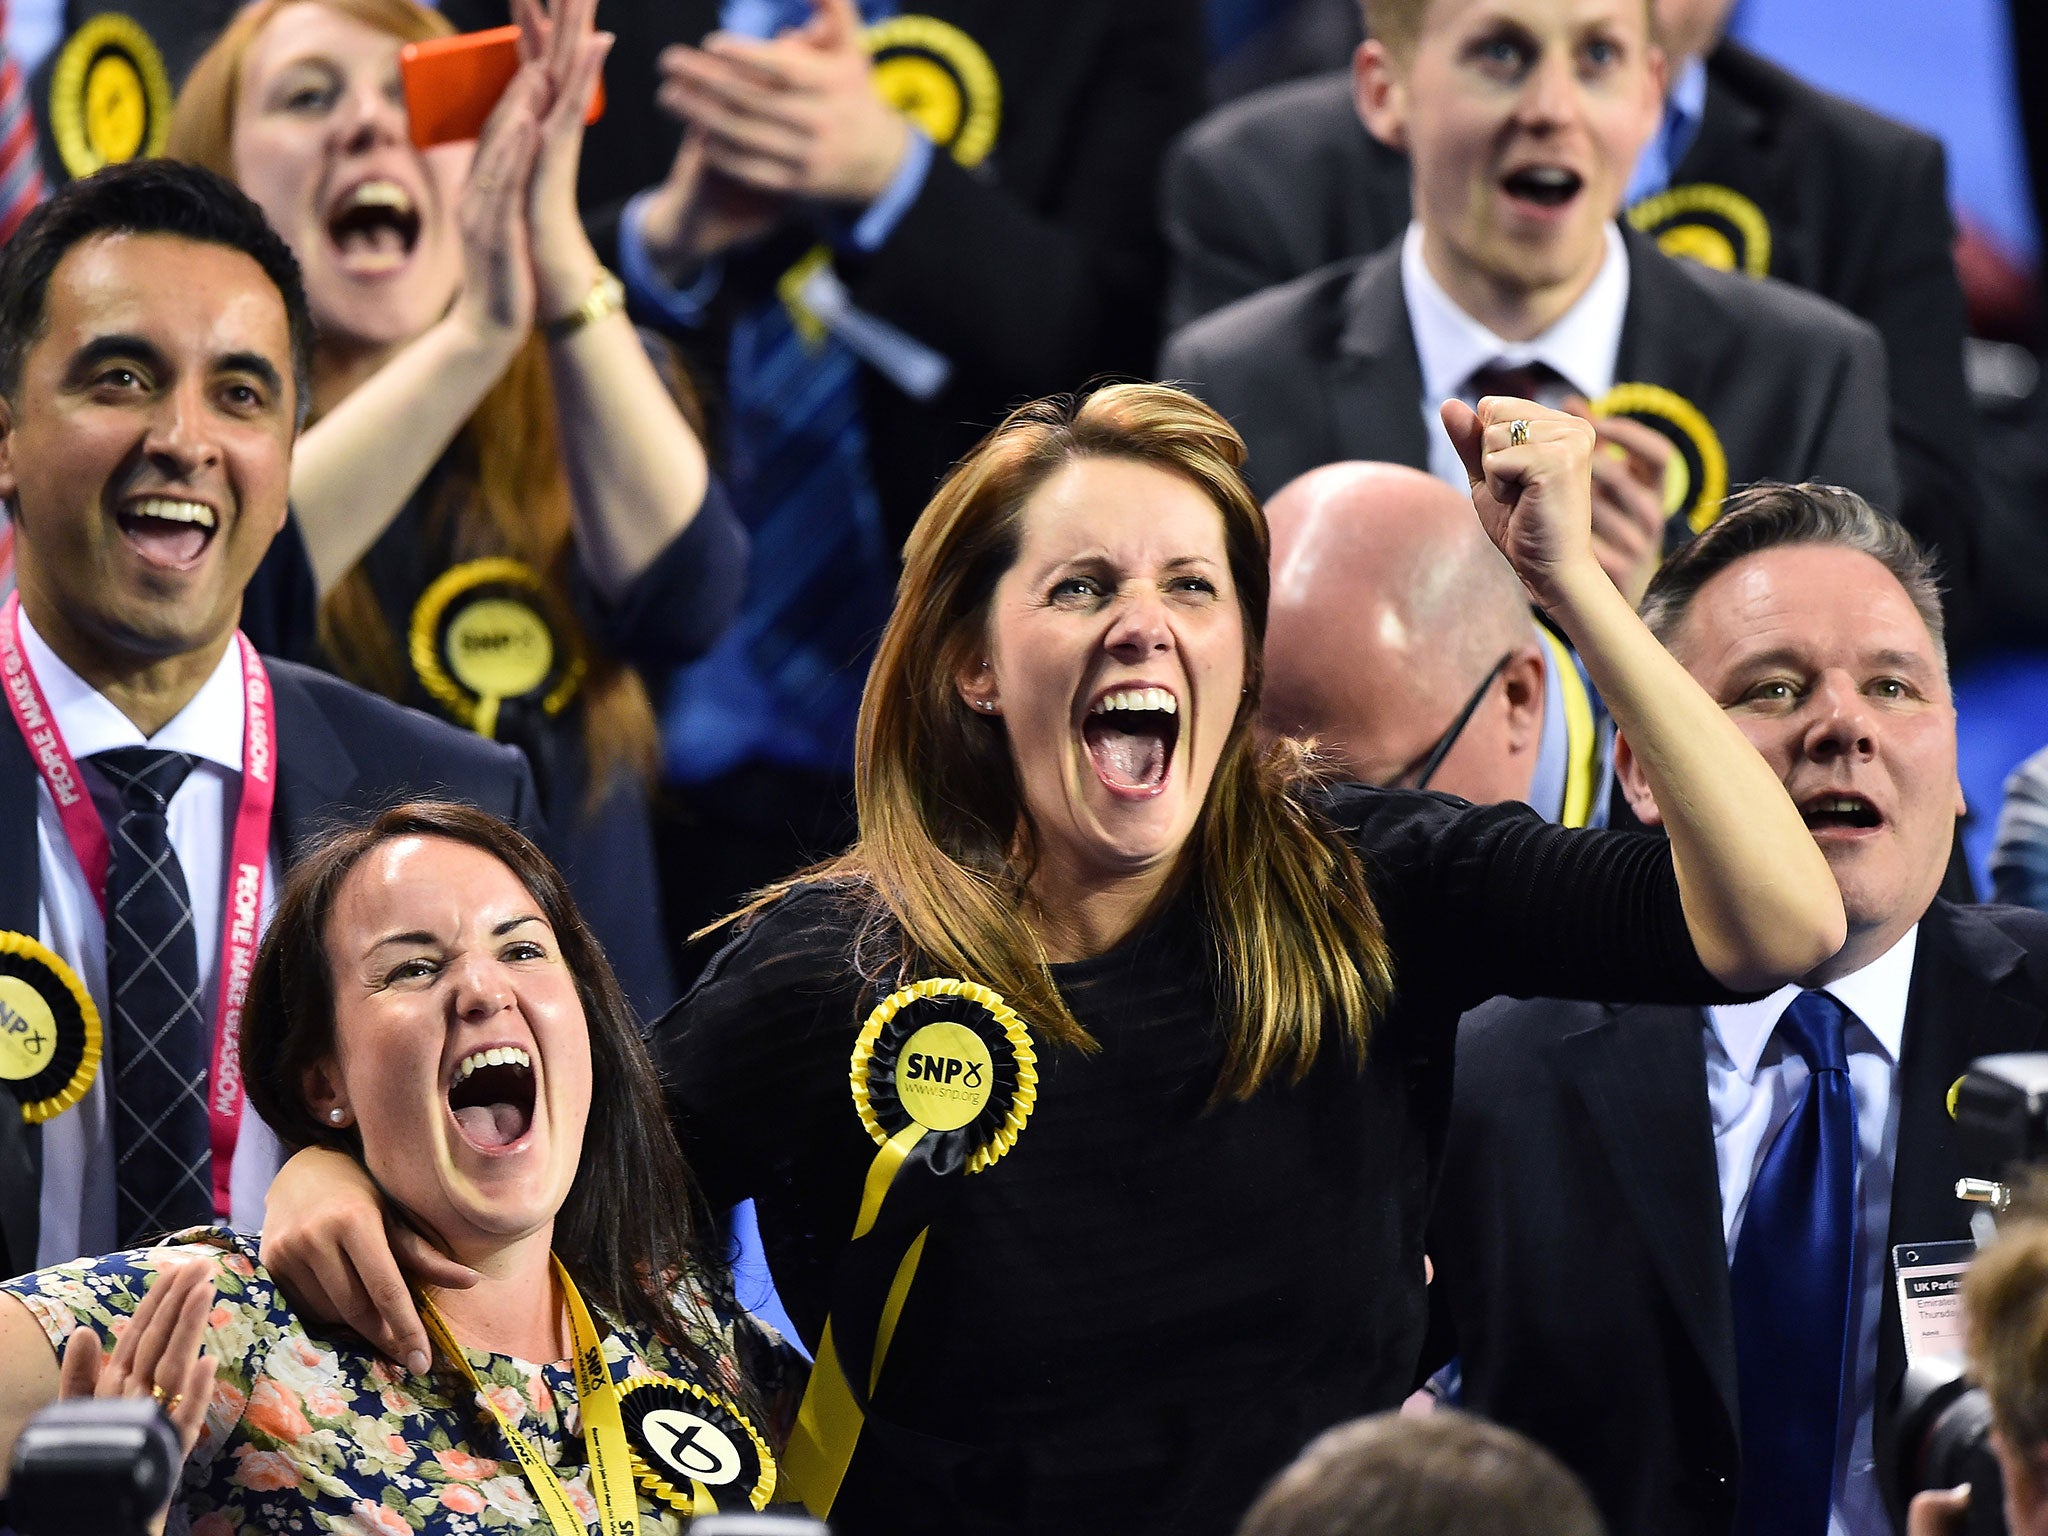 SNP supporters celebrate during the Glasgow declarations in Glasgow, Scotland